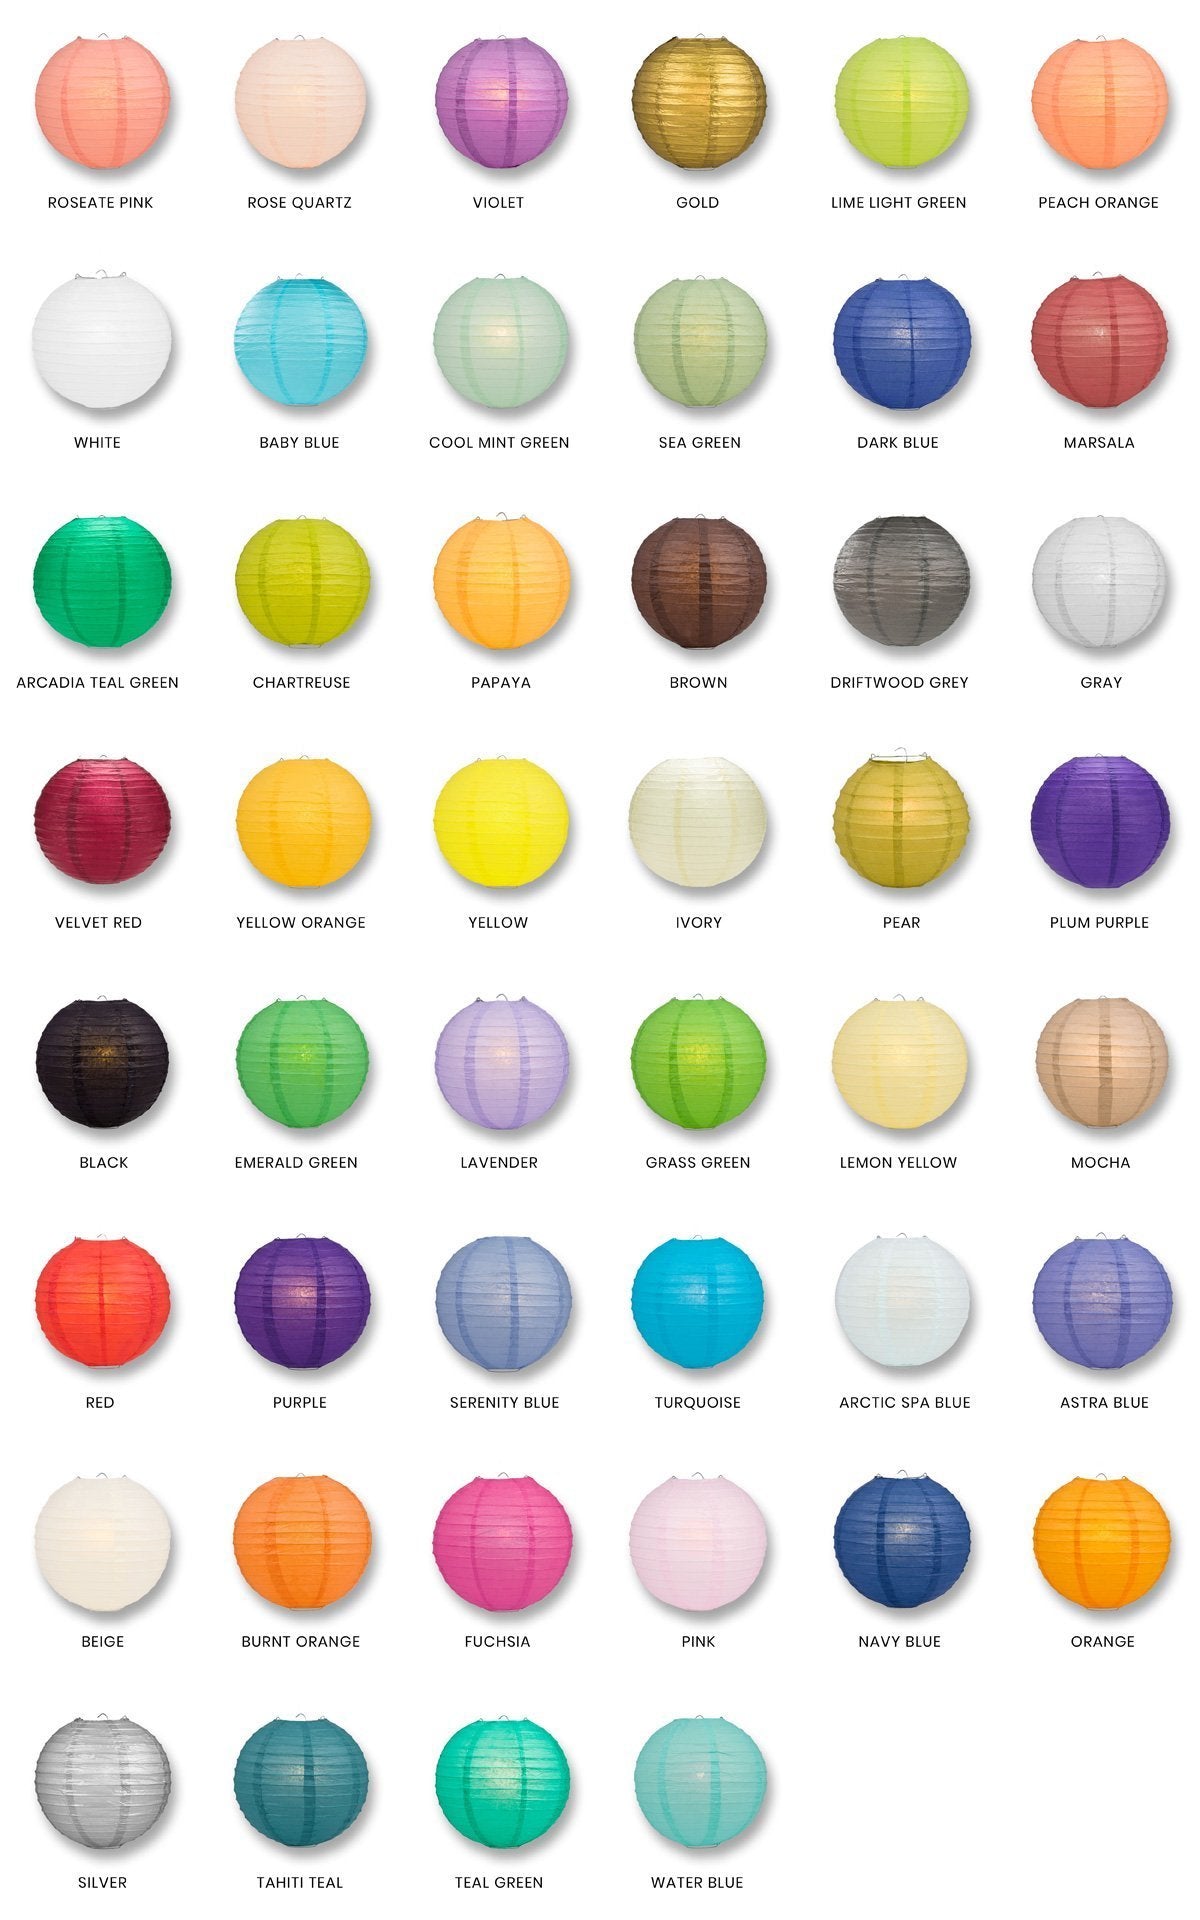 30" Even Ribbing Paper Lanterns - Door-2-Door - Various Colors Available (30-Pieces Master Case, 60-Day Processing)